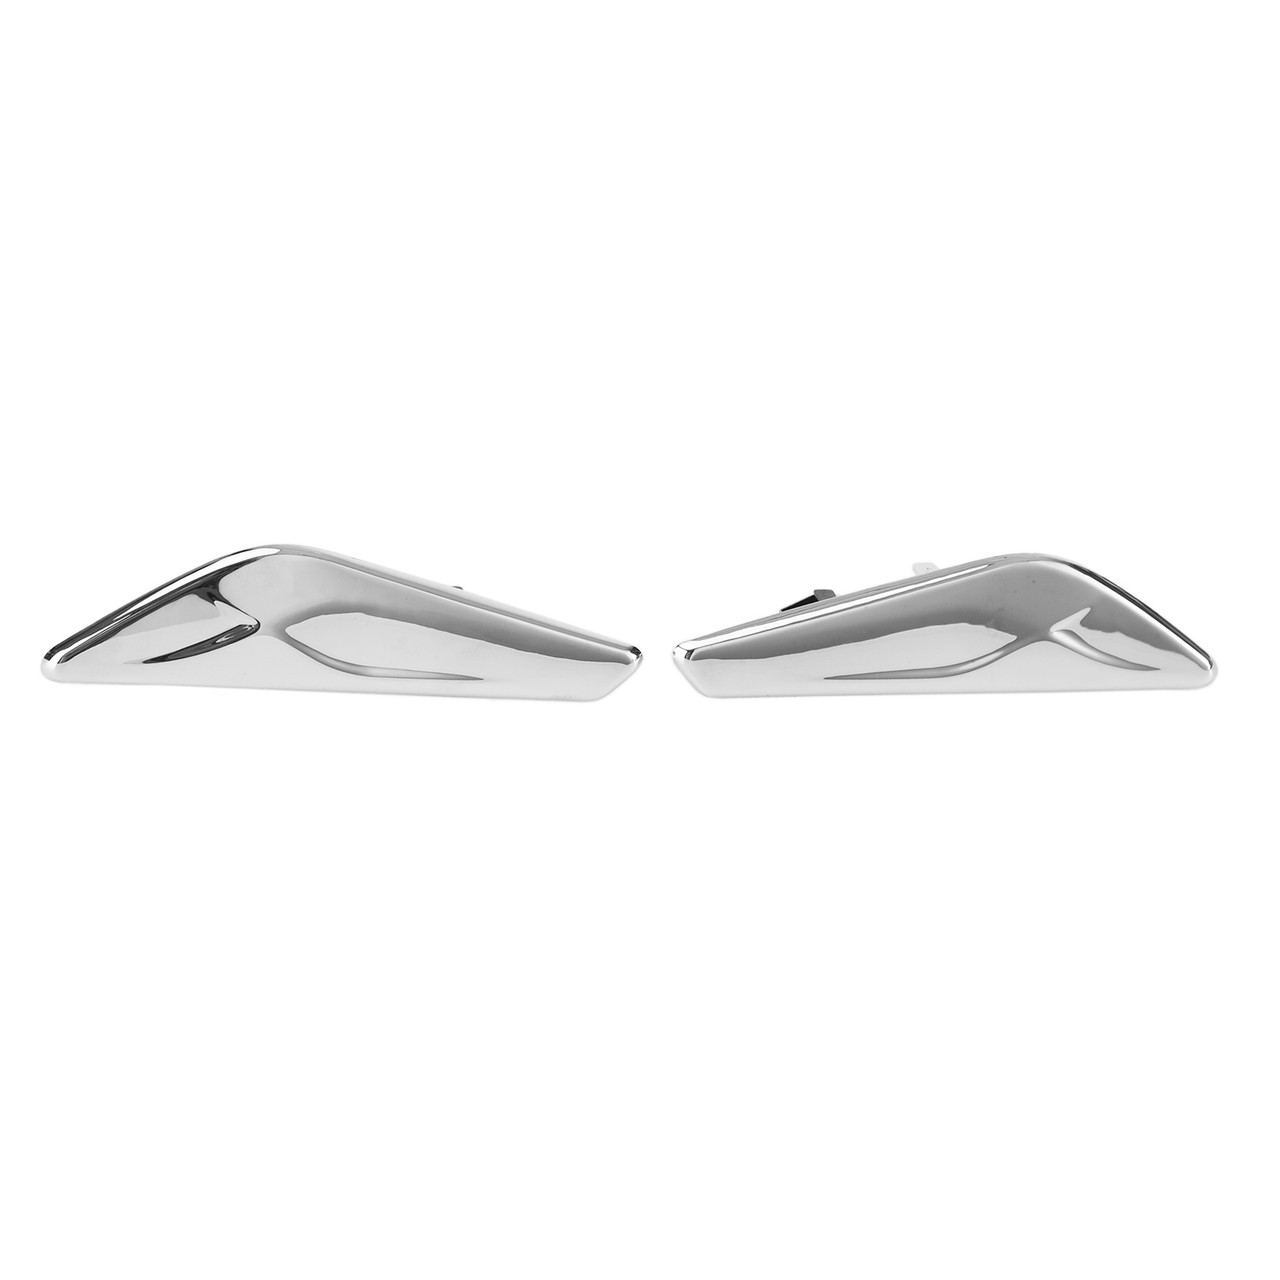 Pair Front Side Fender Trim Finisher 51117338569+51117338570 Fit for BMW F25 F26 X3 X4 Chrome